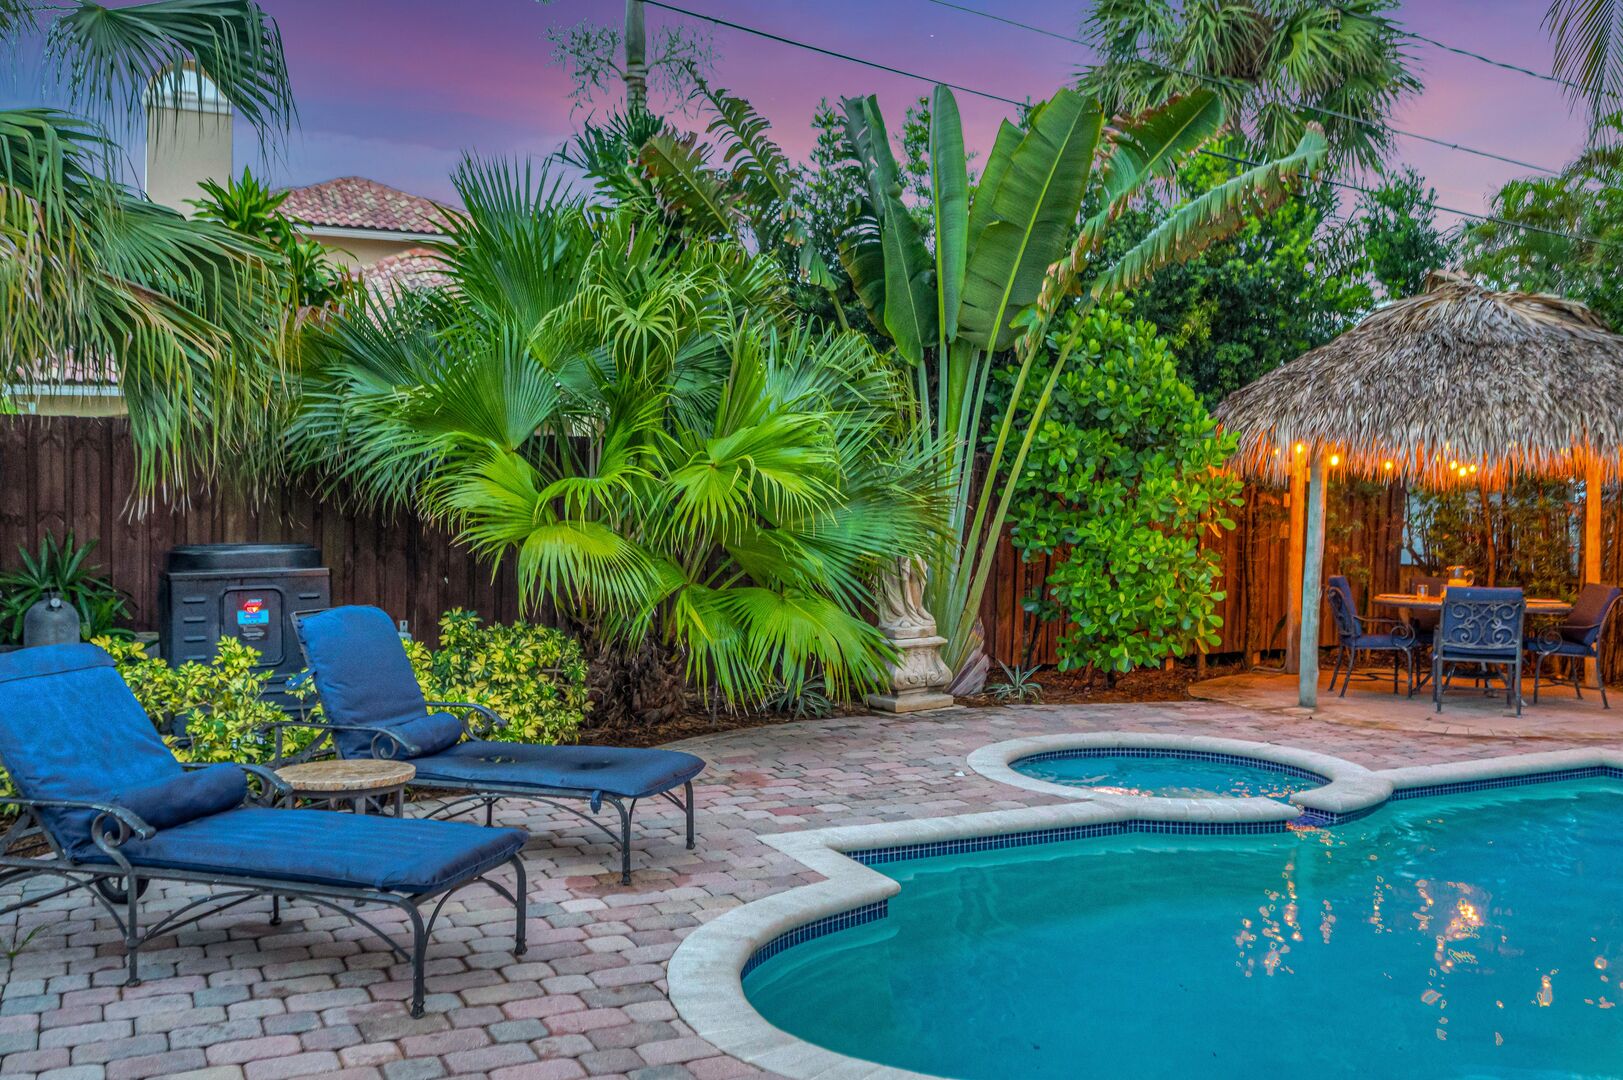 Our enchanting backyard offers a haven of tranquility, perfect for unwinding, exploring, and connecting with nature. Escape to serenity in your own private oasis.